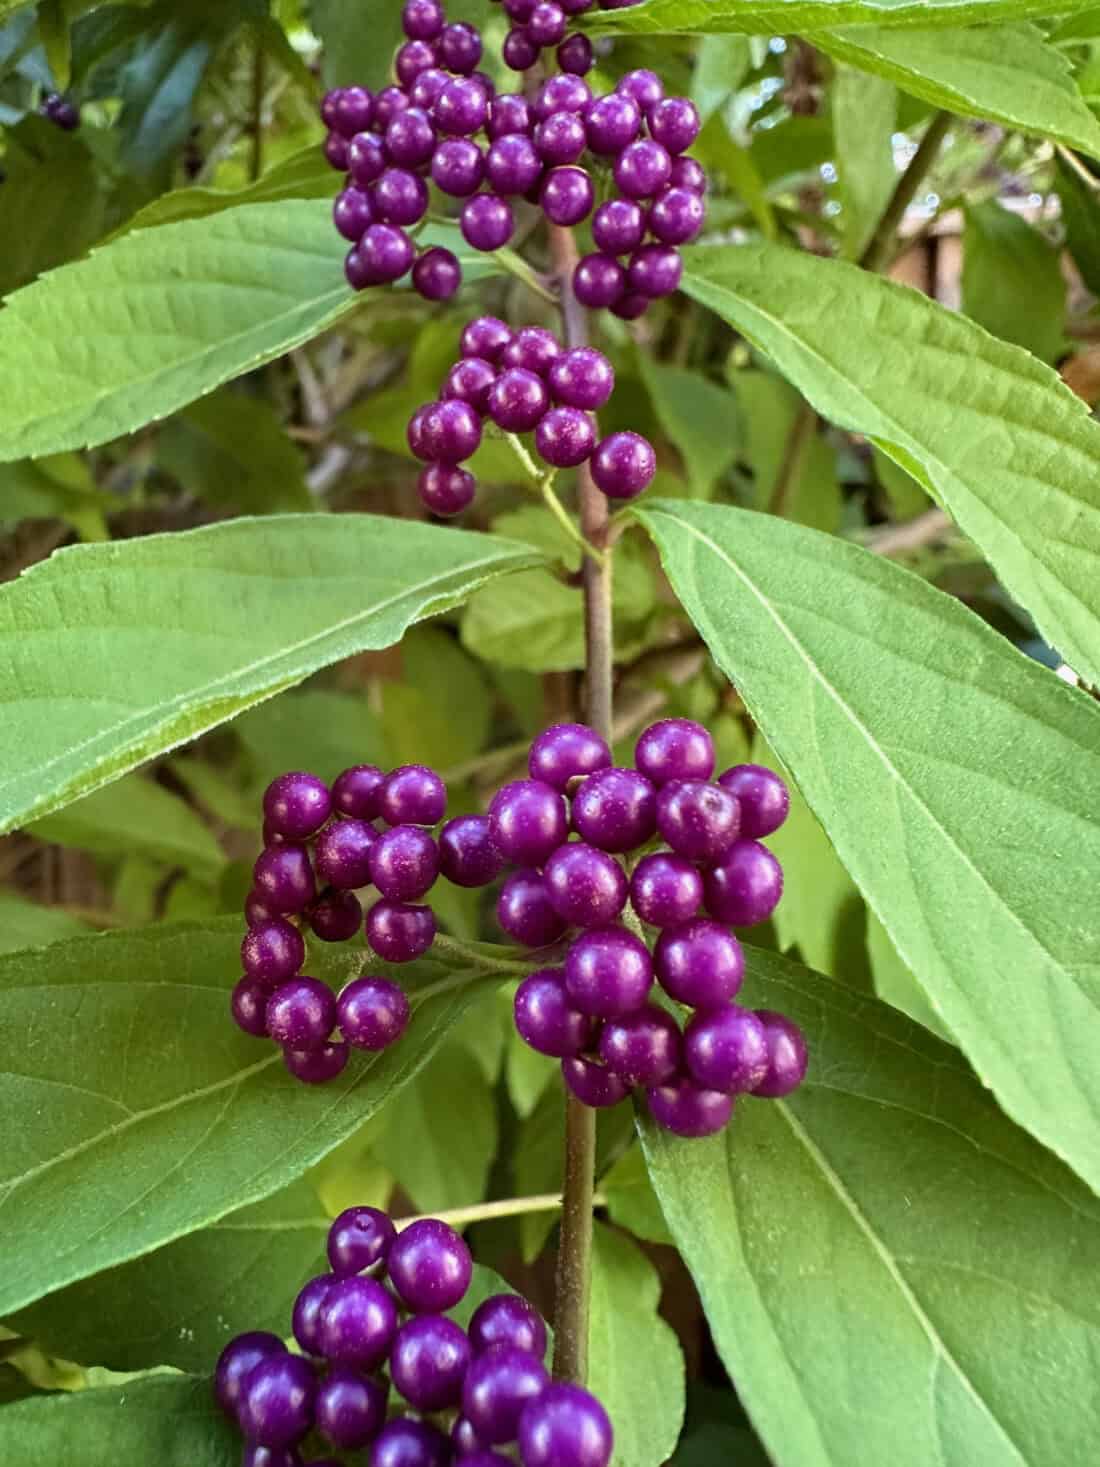 Close-up photo of a Mississippi beautyberry plant, showcasing clusters of vibrant purple berries. The berries are densely packed along the stem, surrounded by elongated green leaves with prominent veins. The background consists of more green foliage.